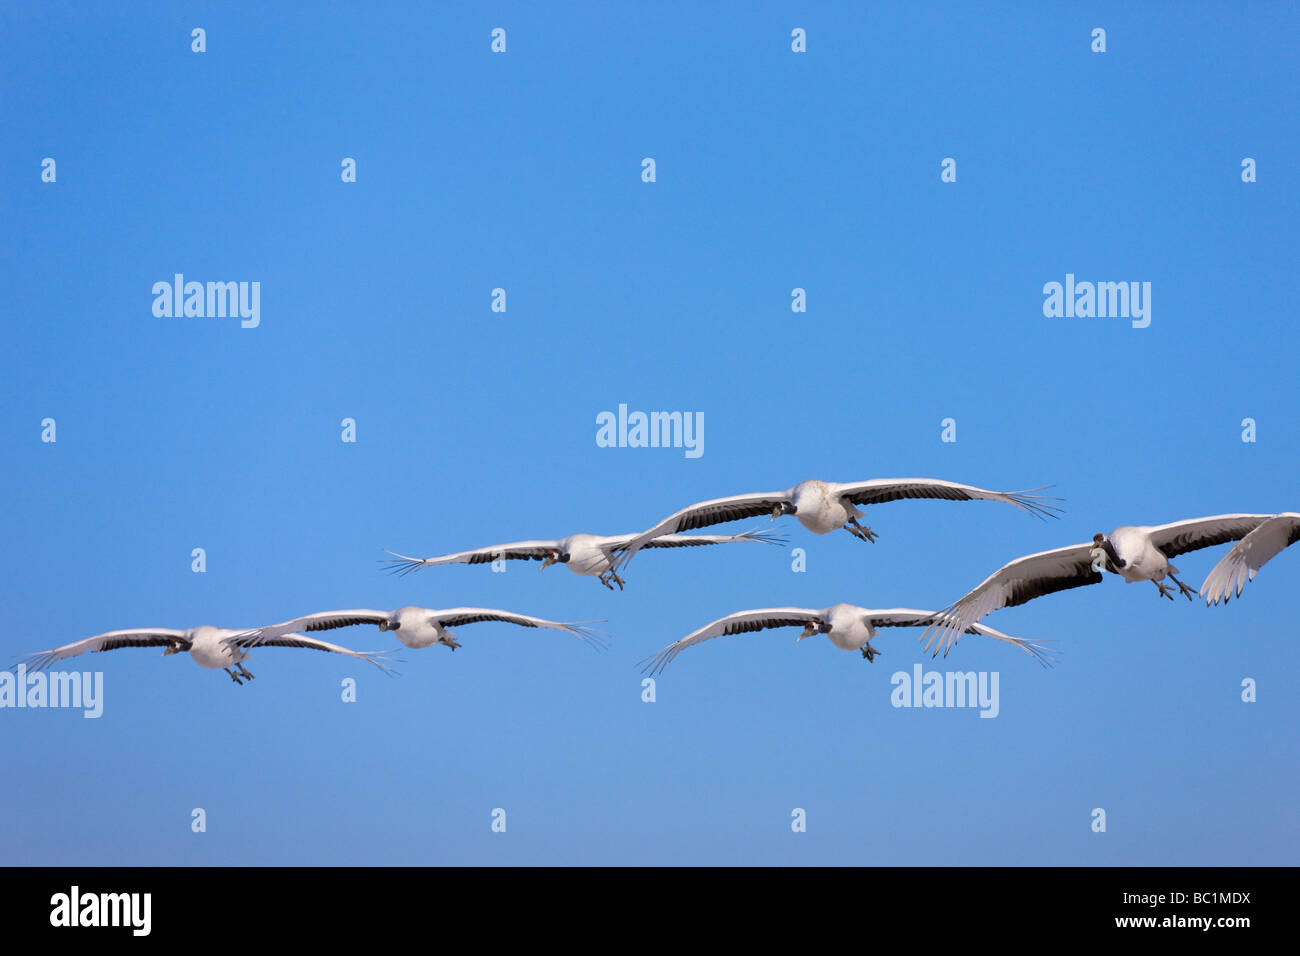 Red crowned cranes flying Zhalong Nature Reserve Heilongjiang China Stock Photo